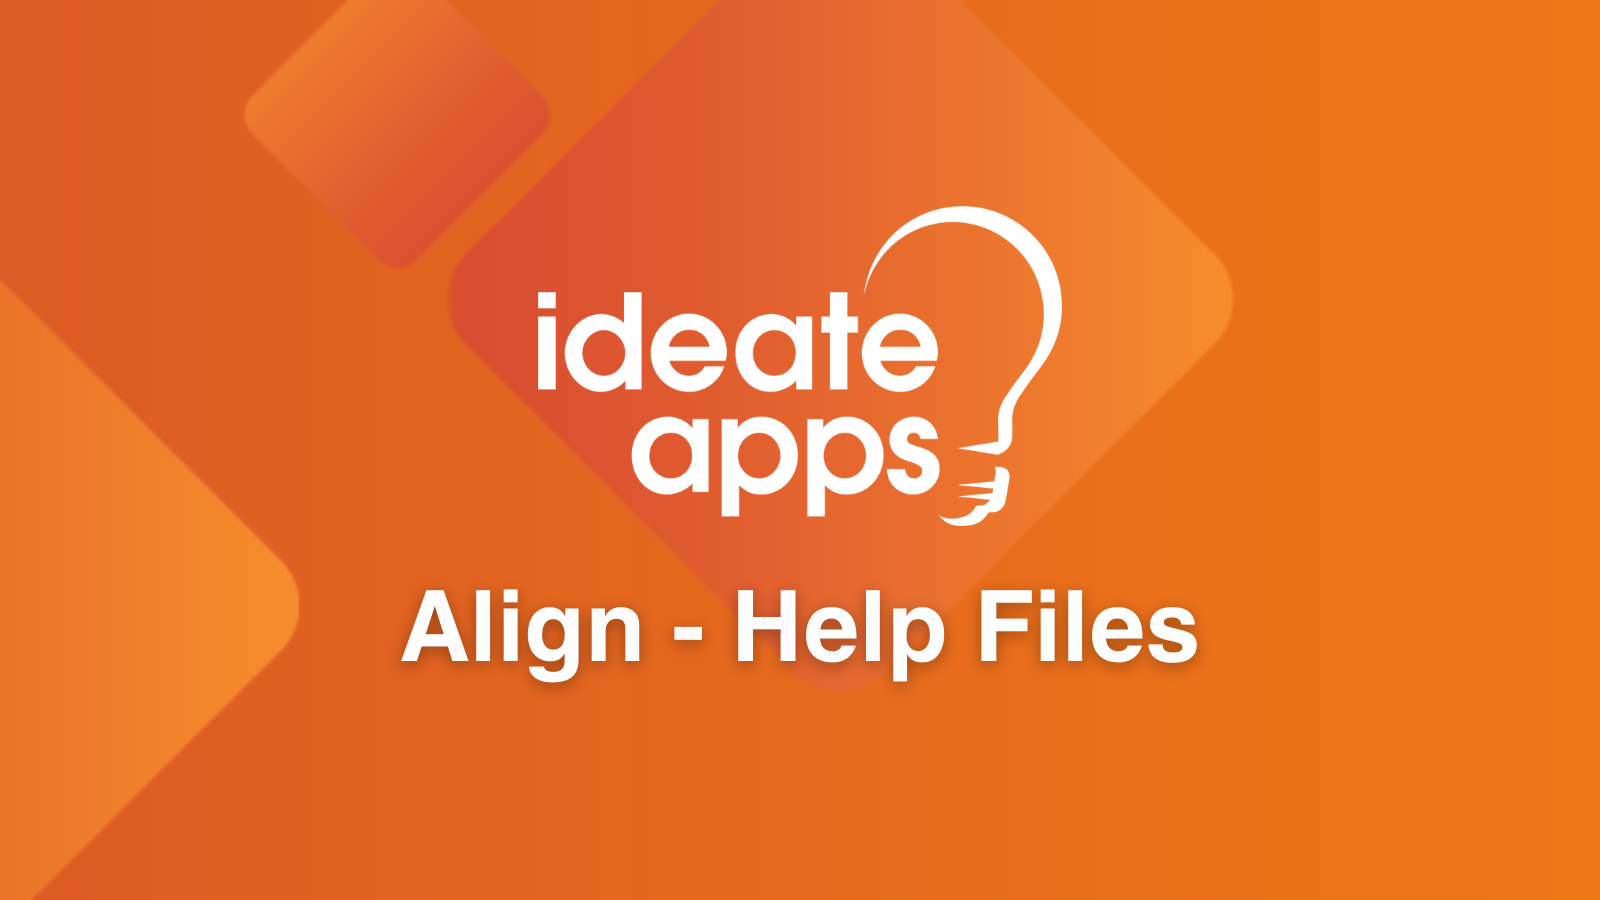 Search IdeateApps Align Help Files